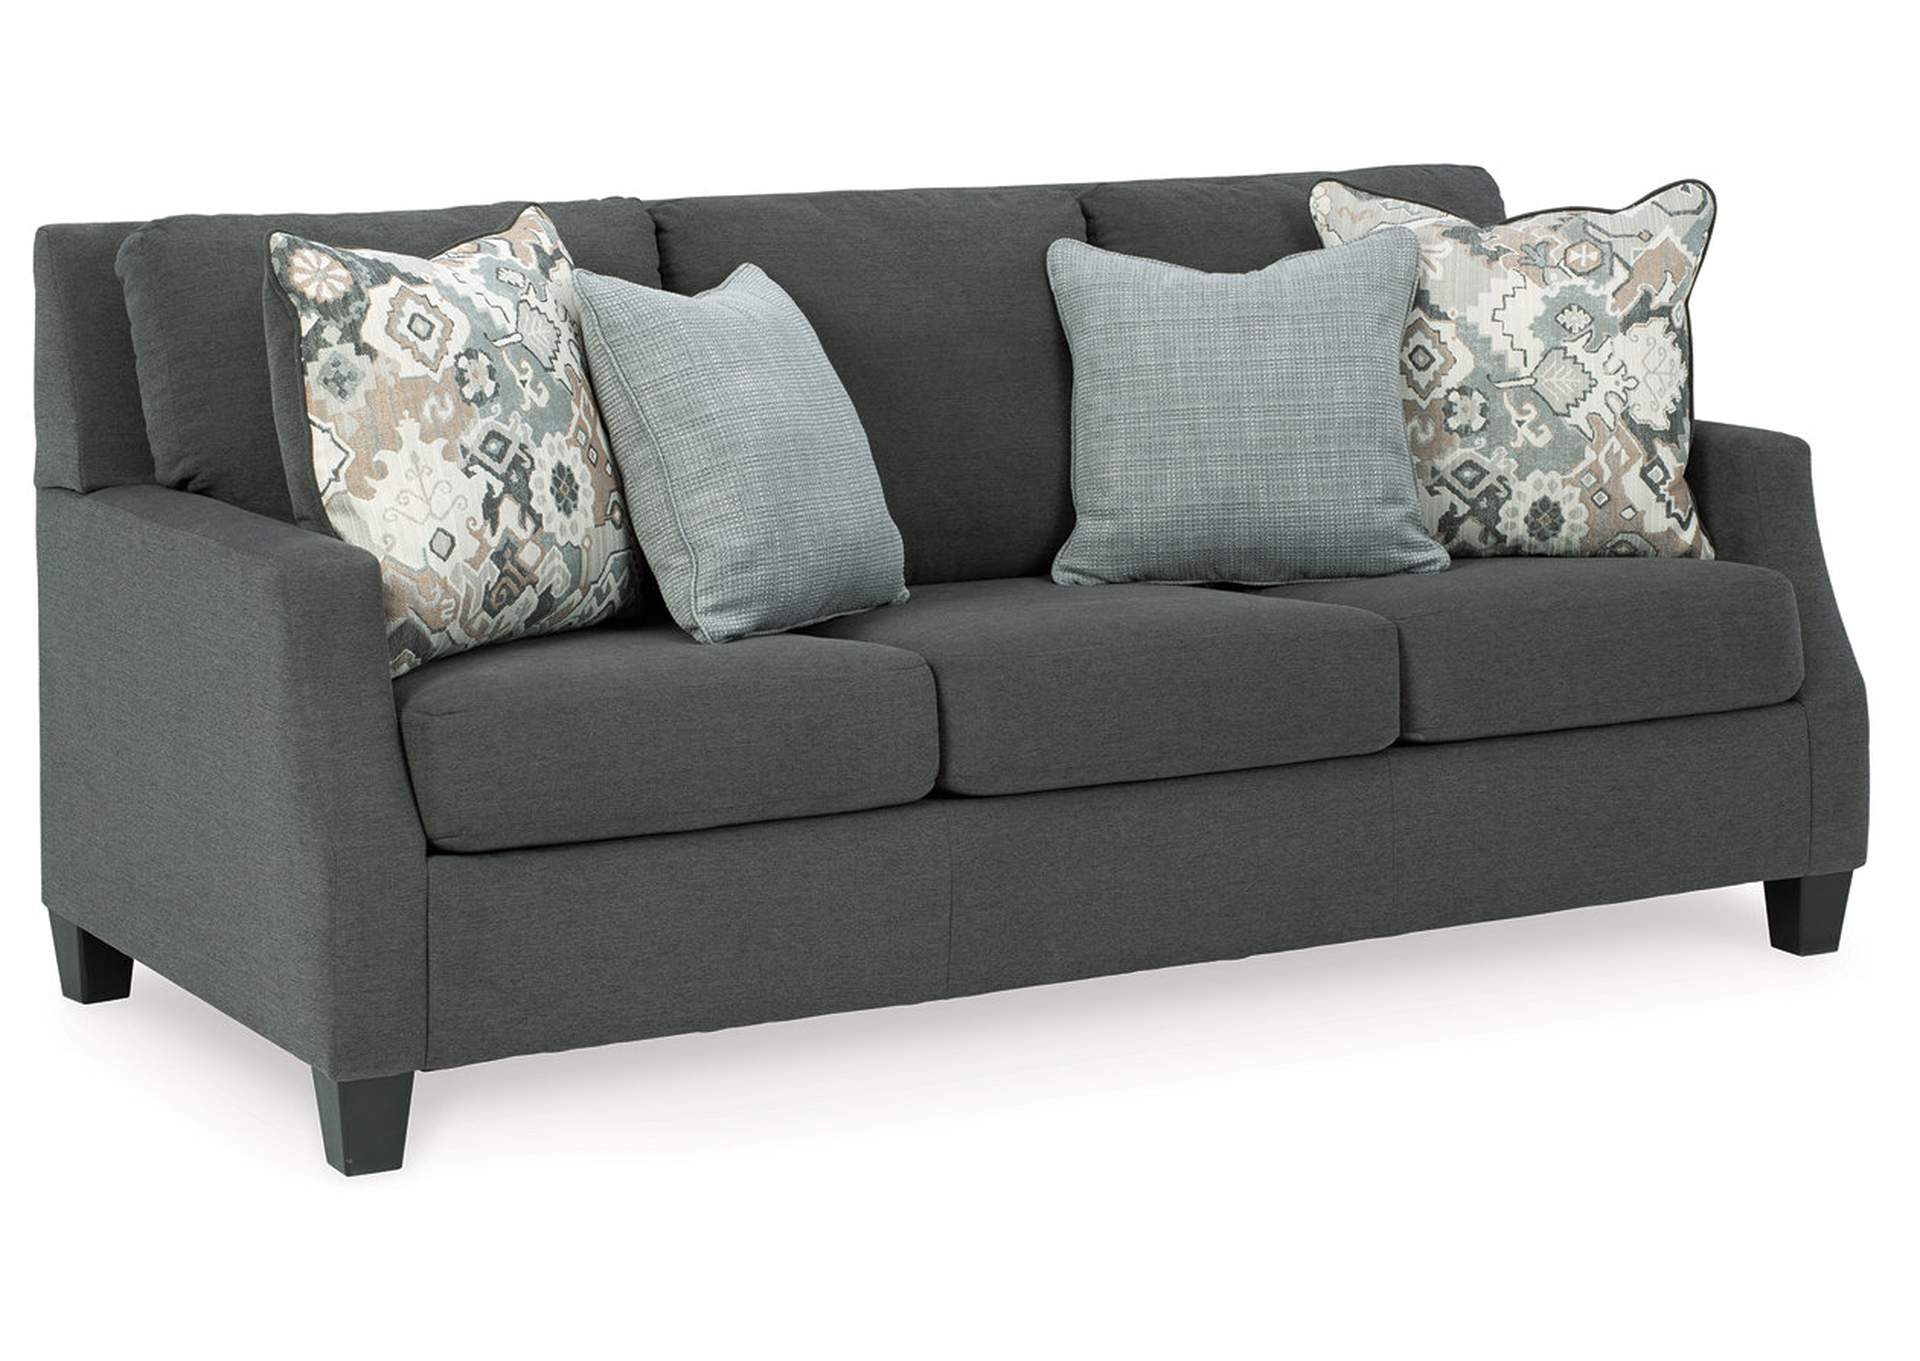 Bayonne Sofa and Loveseat,Signature Design By Ashley